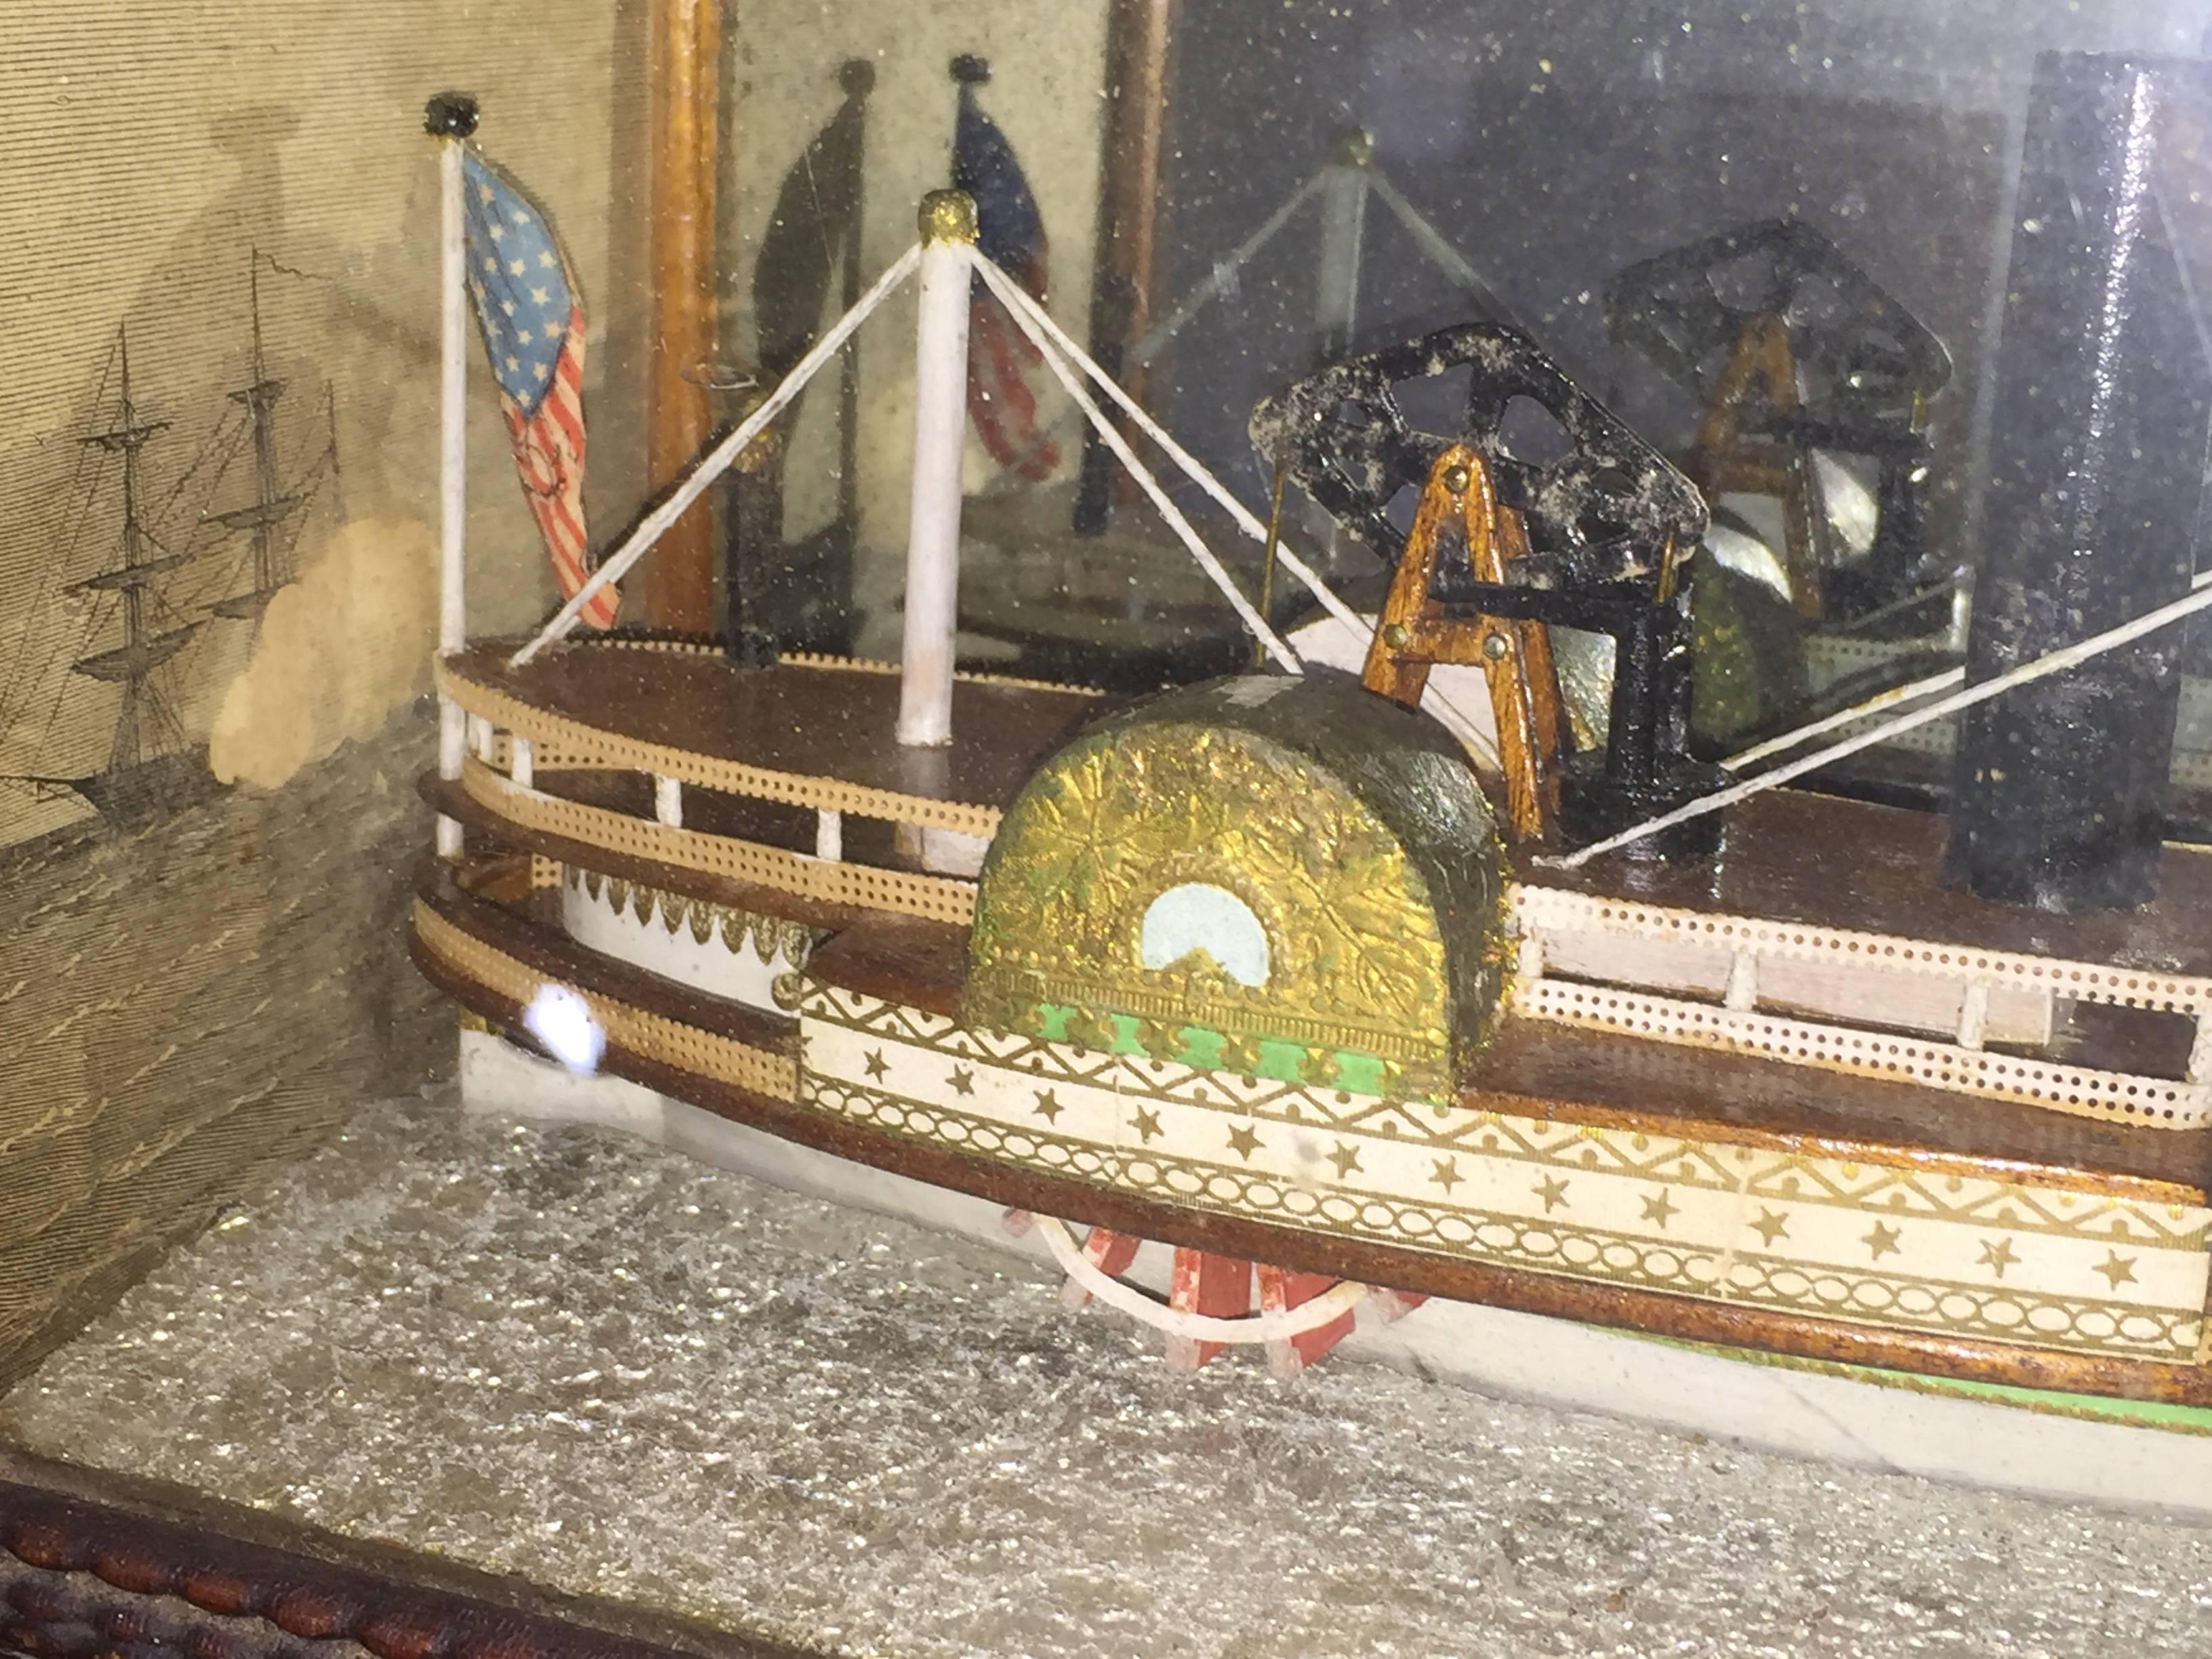 This a very unusual especially diminutive diorama of a paddle wheel ship from New England with intricate detail marine scene wallpaper on sides and top and a hand-caned frame. The diorama most likely was made in Maine or New Hampshire in the late